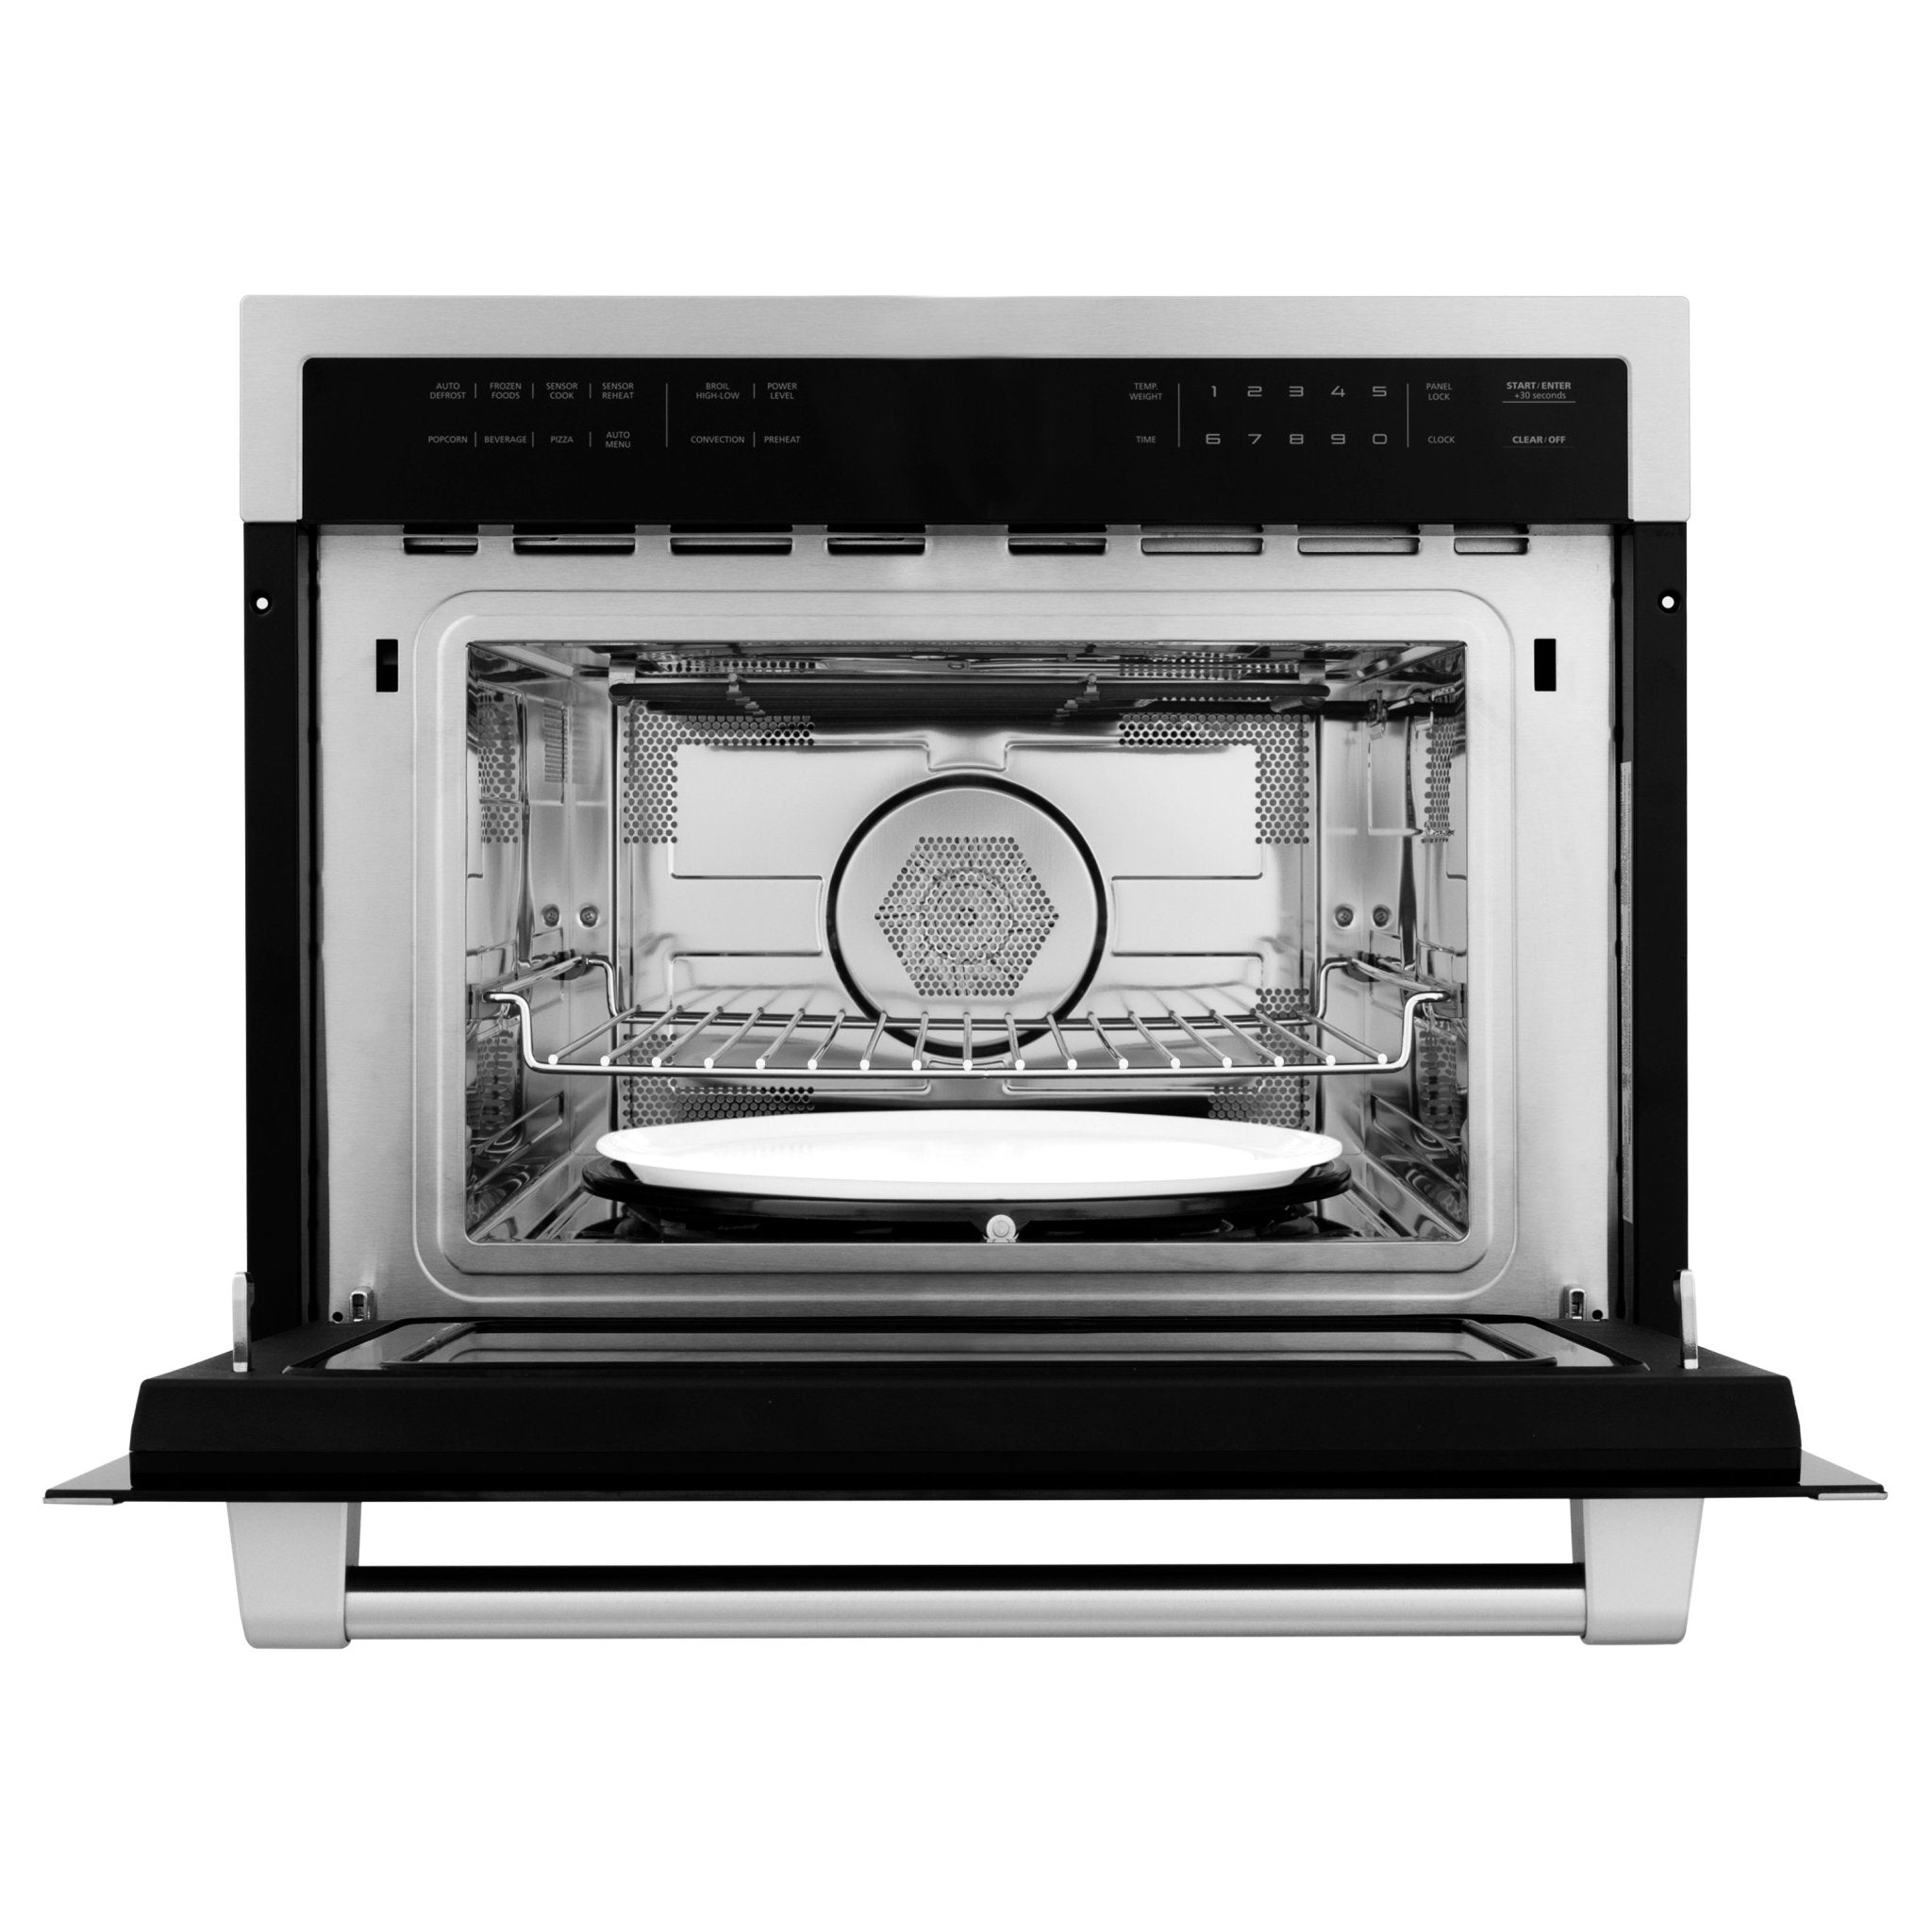 ZLINE Kitchen and Bath, ZLINE 24" Microwave Oven in Stainless Steel (MWO-24), MWO-24,